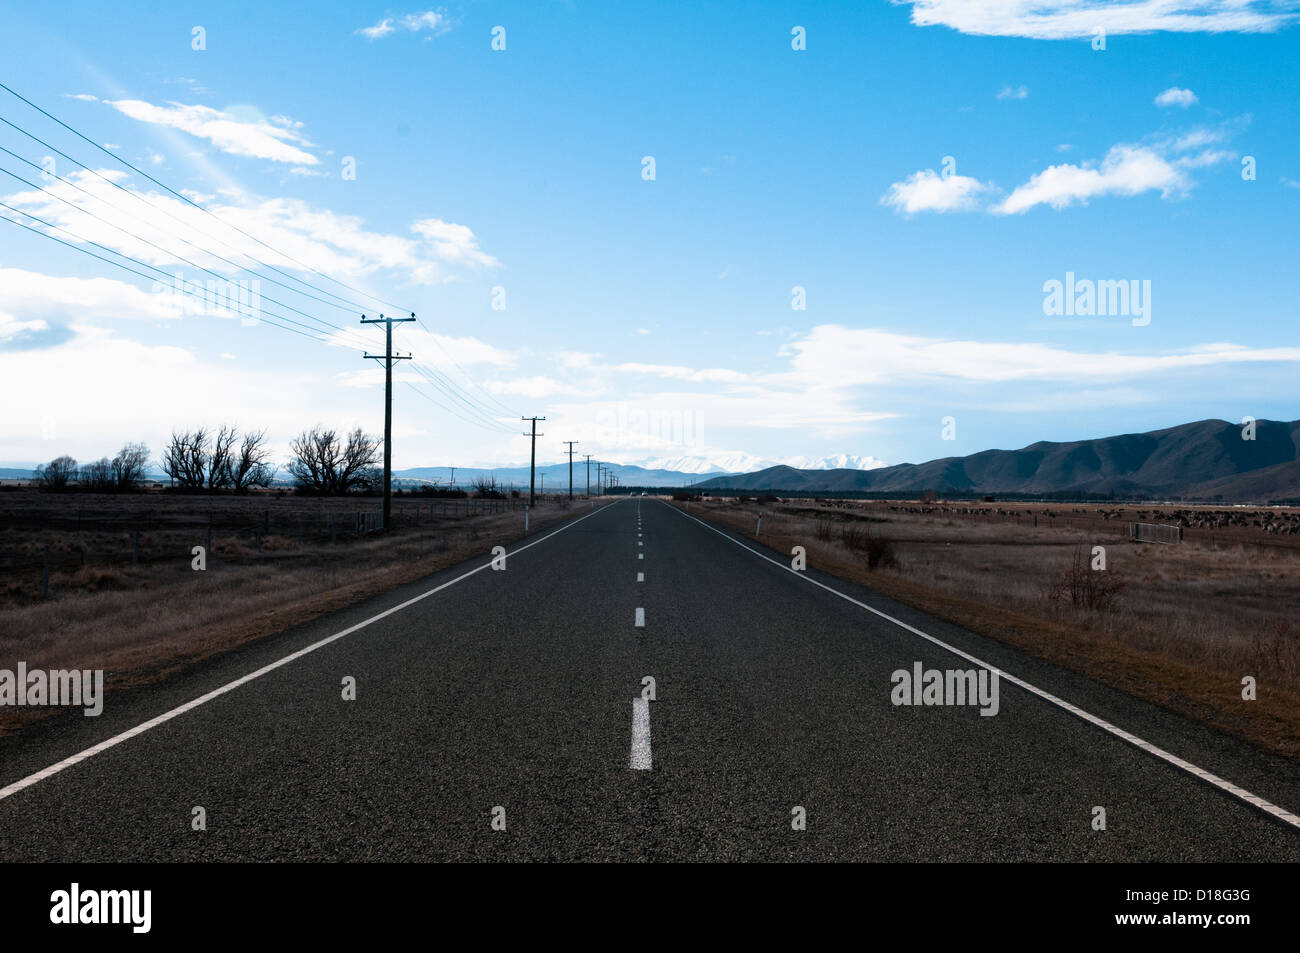 Paved road in rural landscape Stock Photo